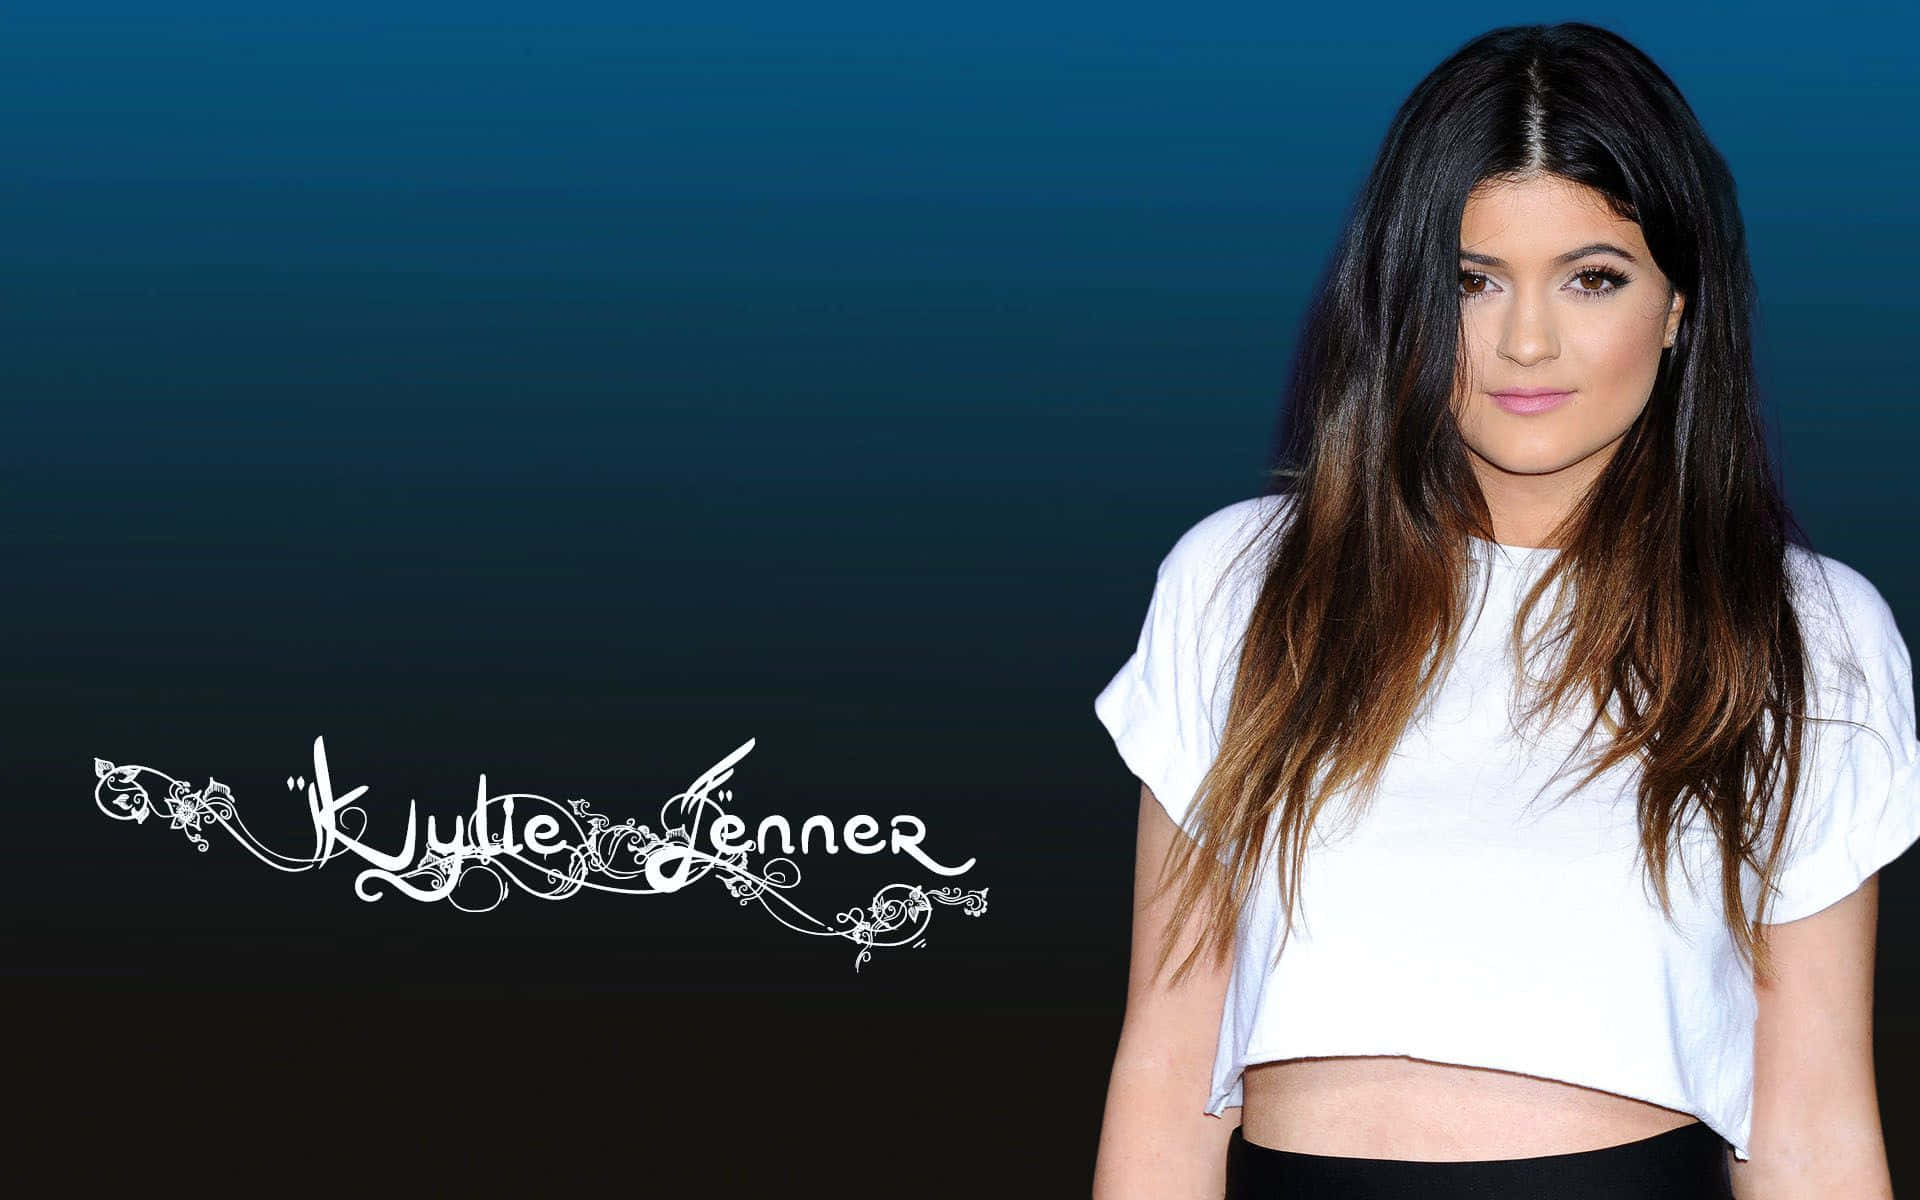 "Kylie Jenner strikes a pose in her signature style."